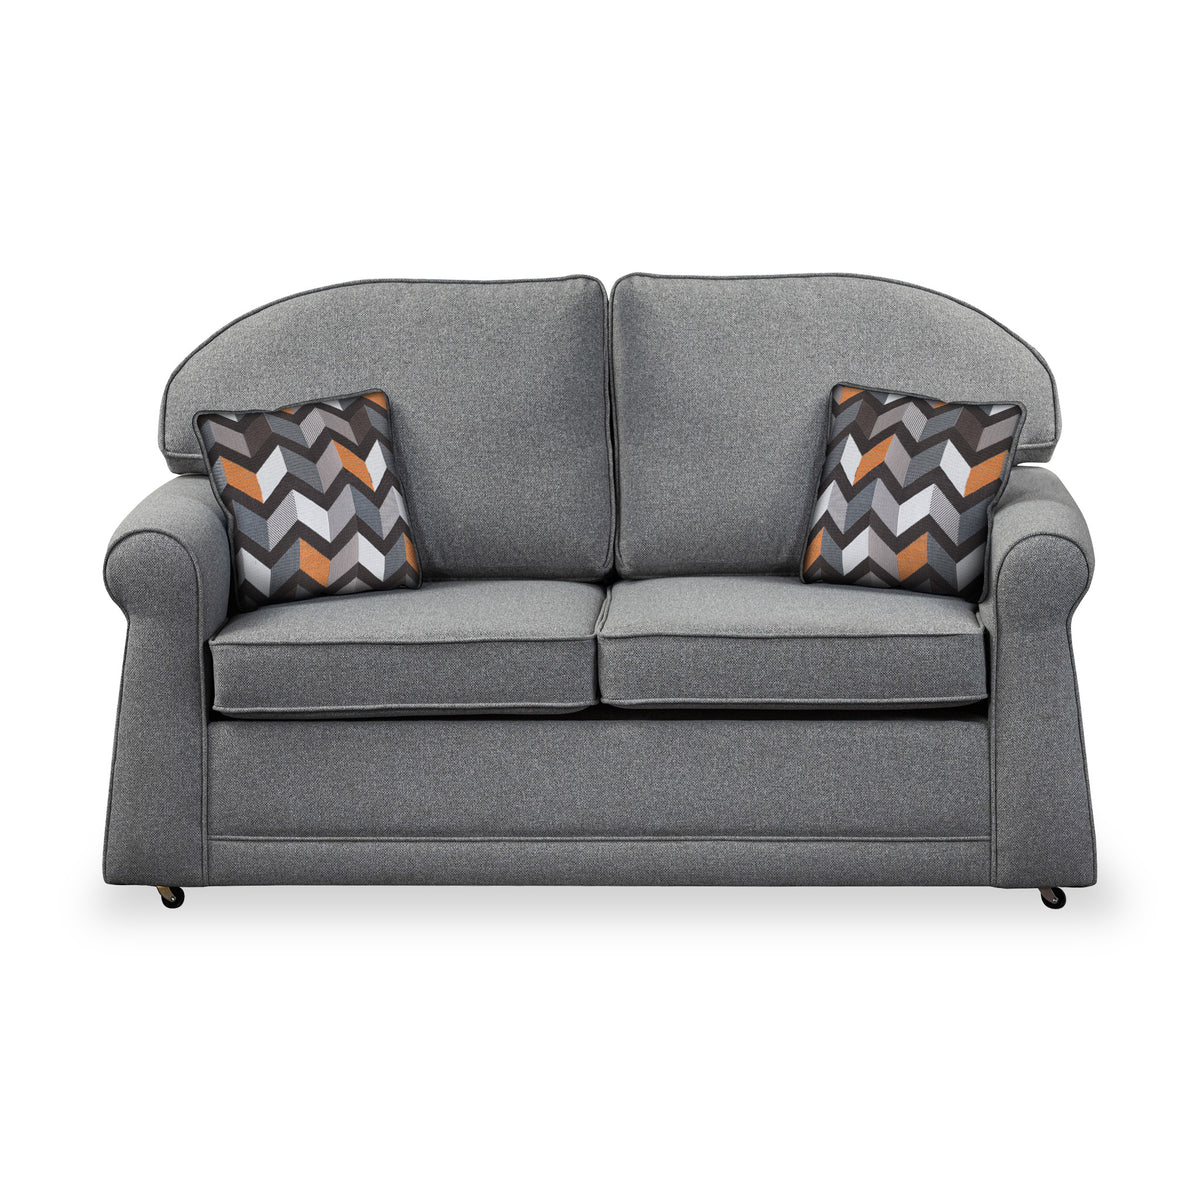 Croxdon Silver Faux Linen 2 Seater Sofabed with Charcoal Scatter Cushions from Roseland Furniture